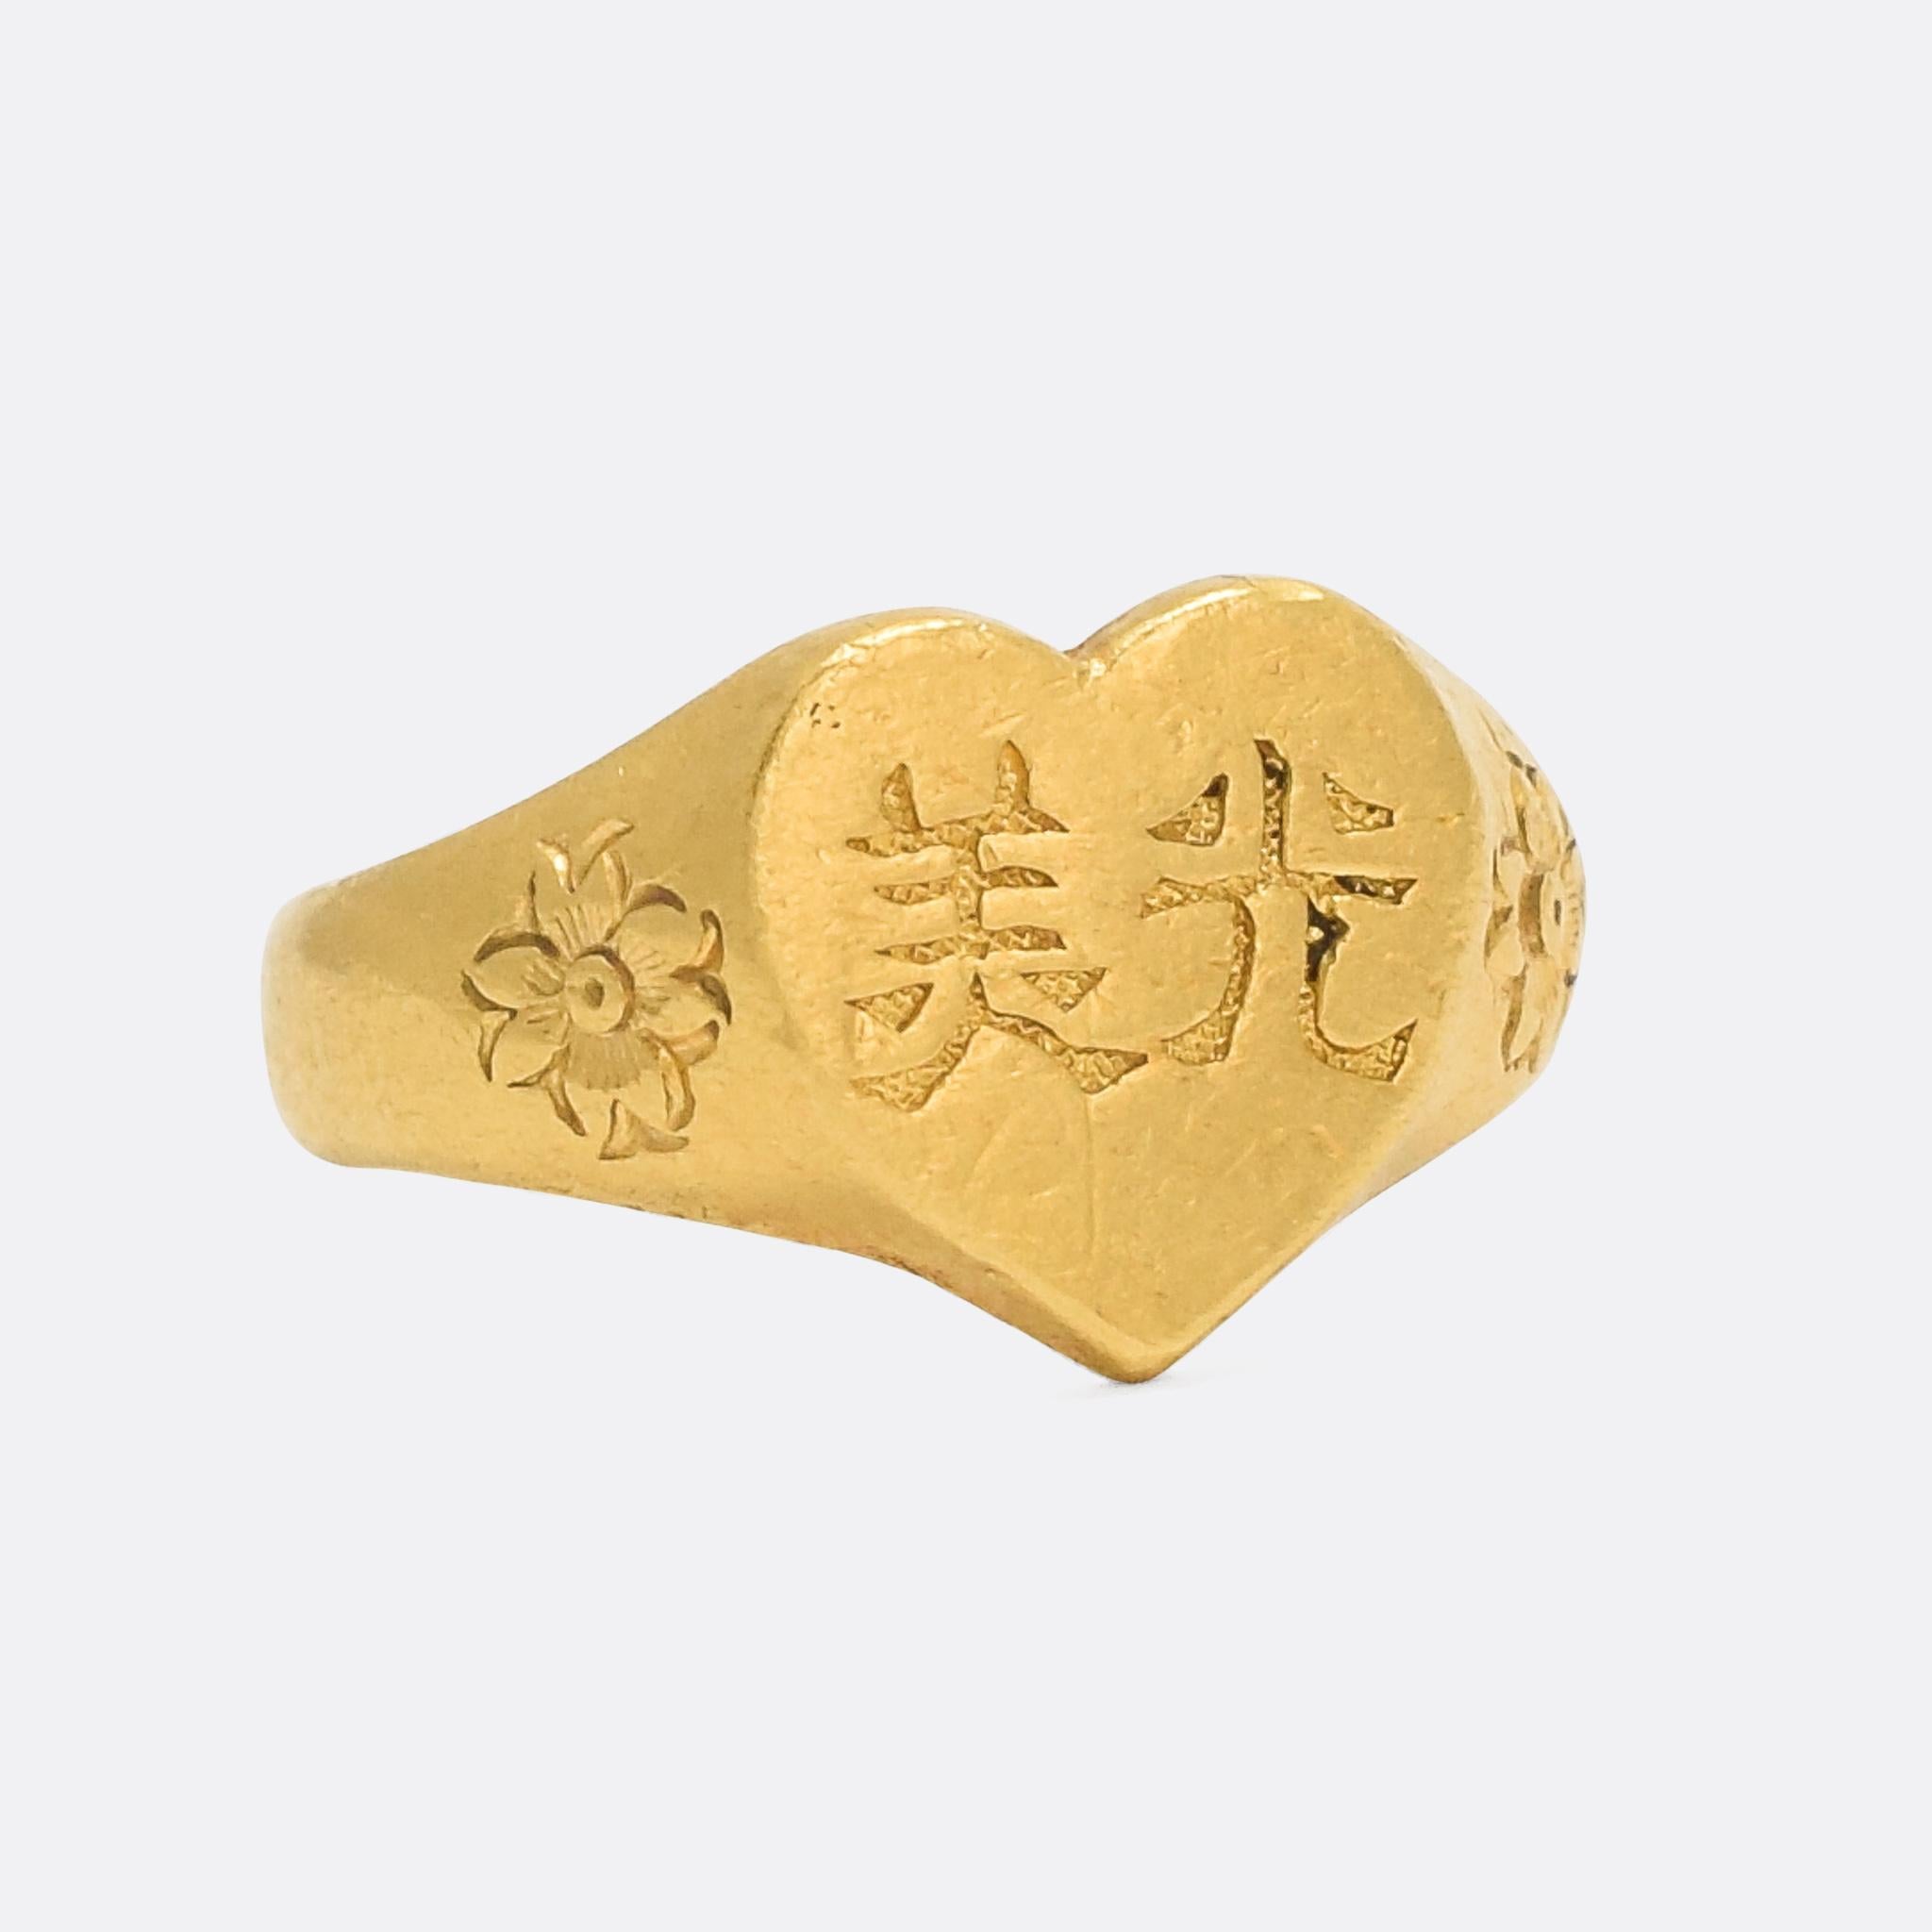 The sweetest of antique signet rings, modelled in 22k gold with a heart shaped face. The Chinese characters on the front mean Beautiful Light, and it also features hand-chased flowers, one on each shoulder. It dates from the turn of the 20th